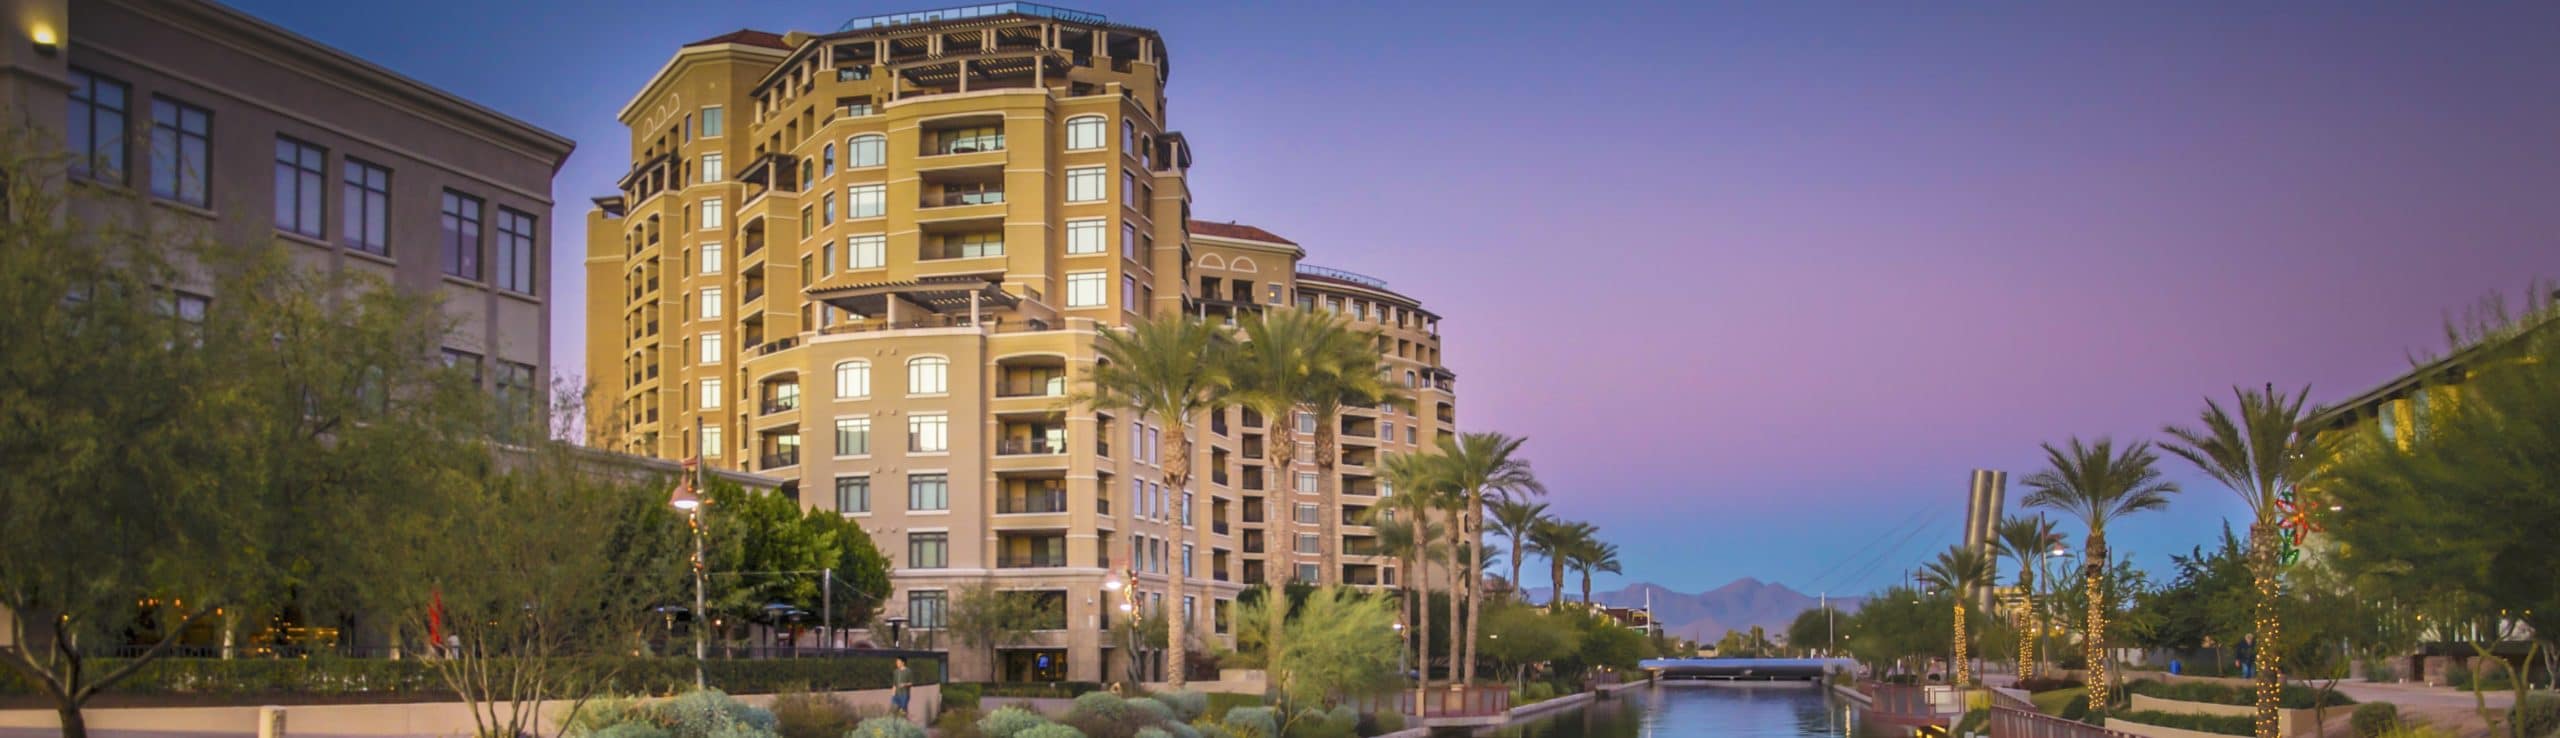 scottsdale-waterfront-condos-for-sale-000